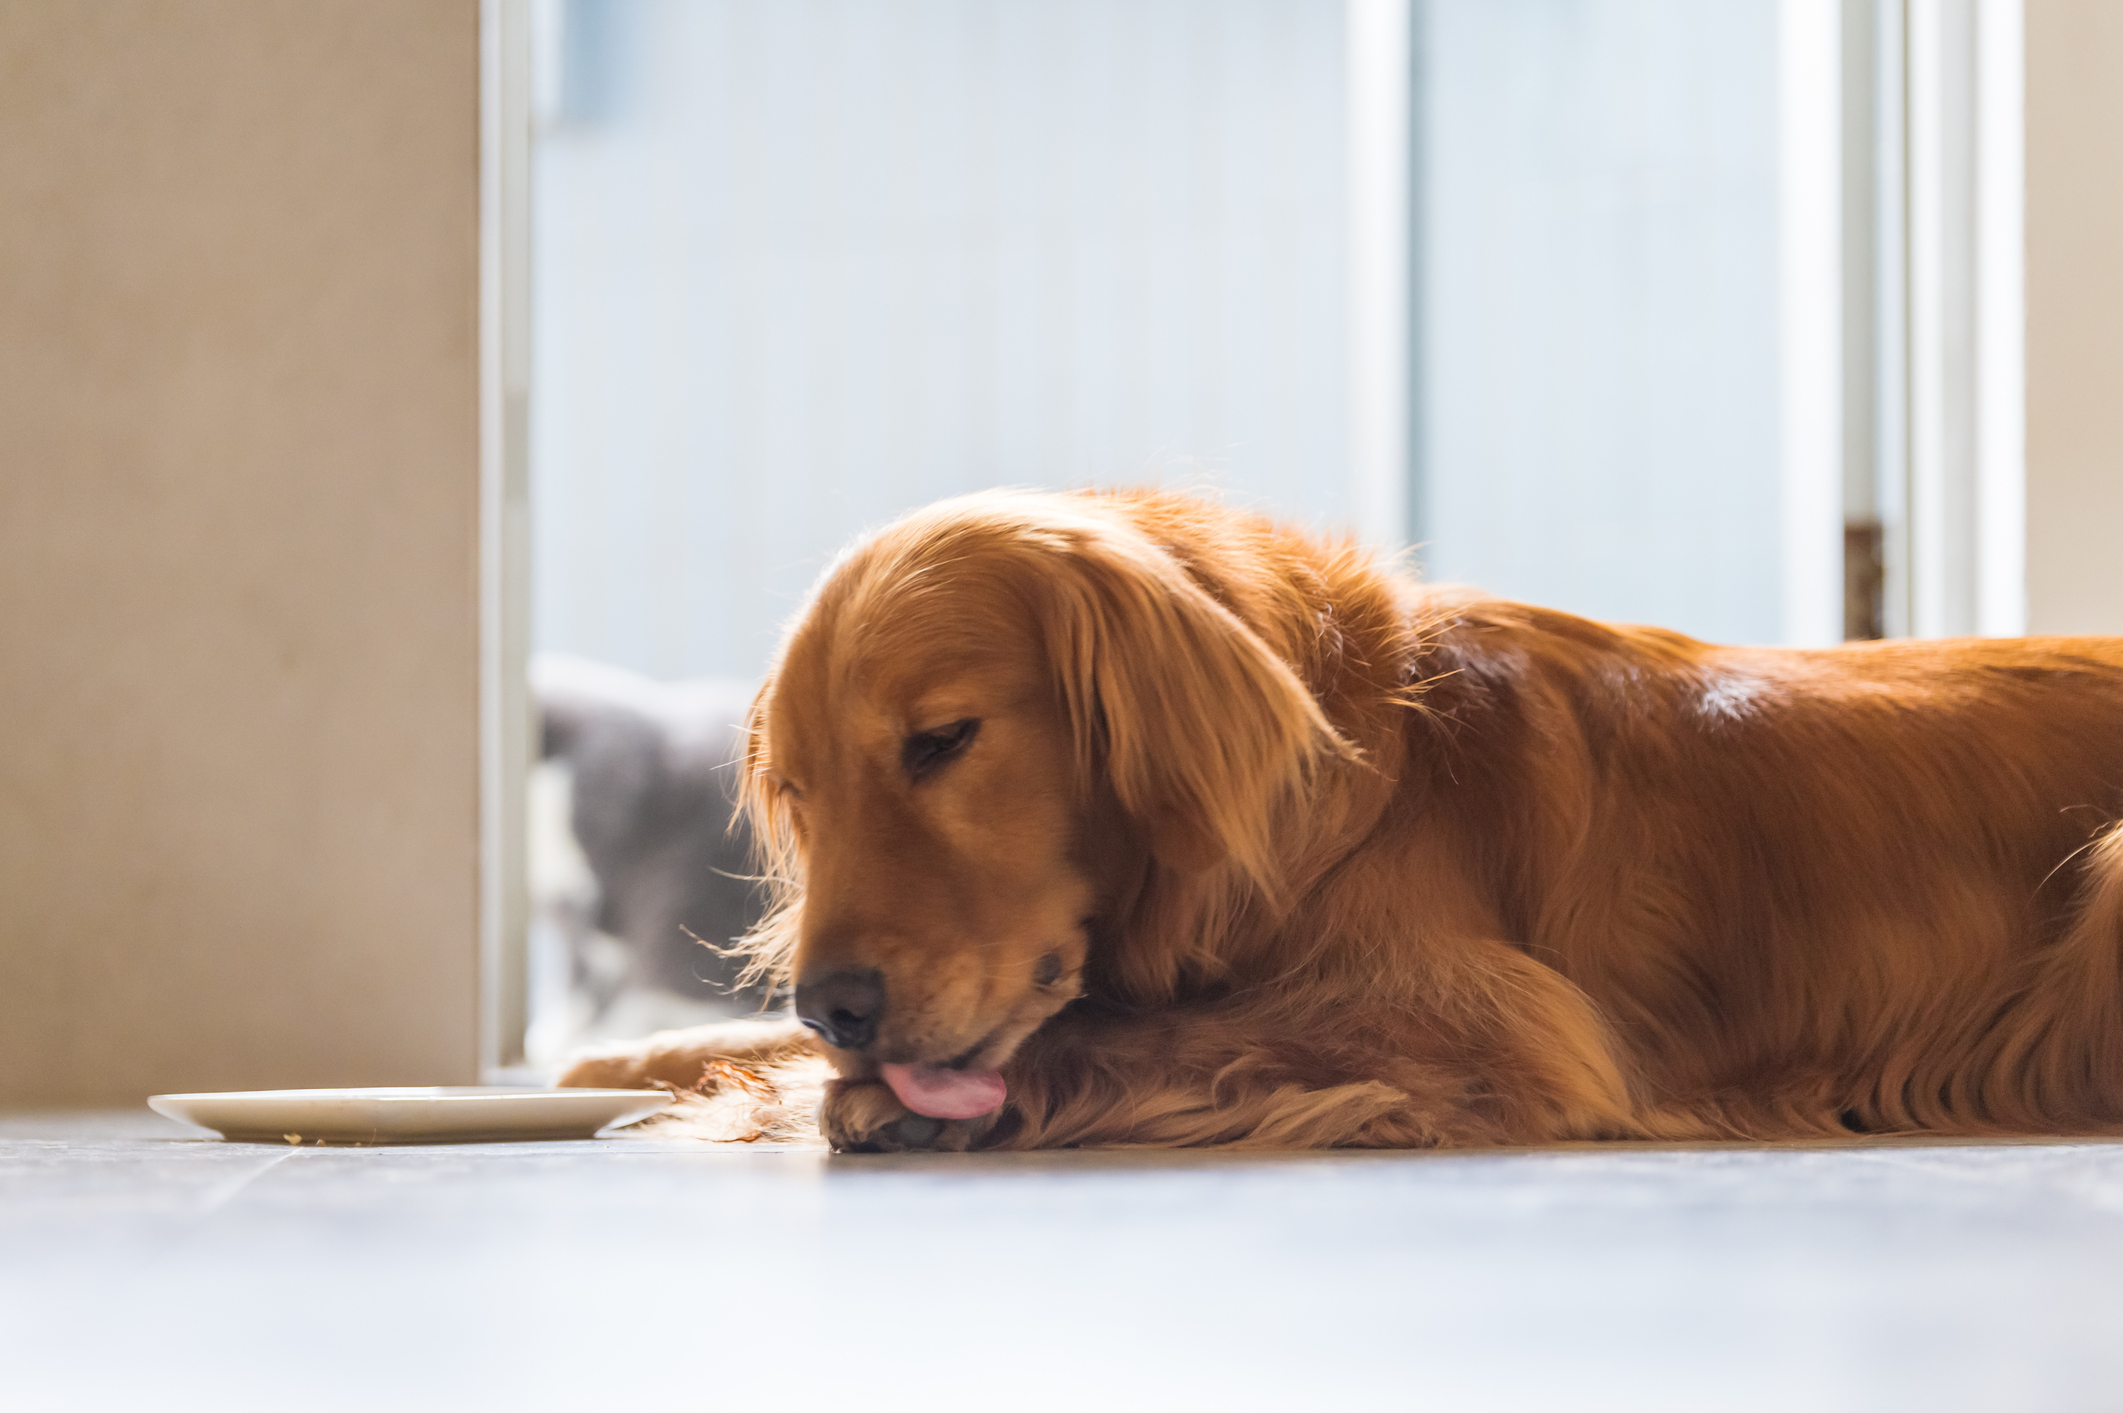 Why Do Dogs Lick Their Paws? - Newsweek